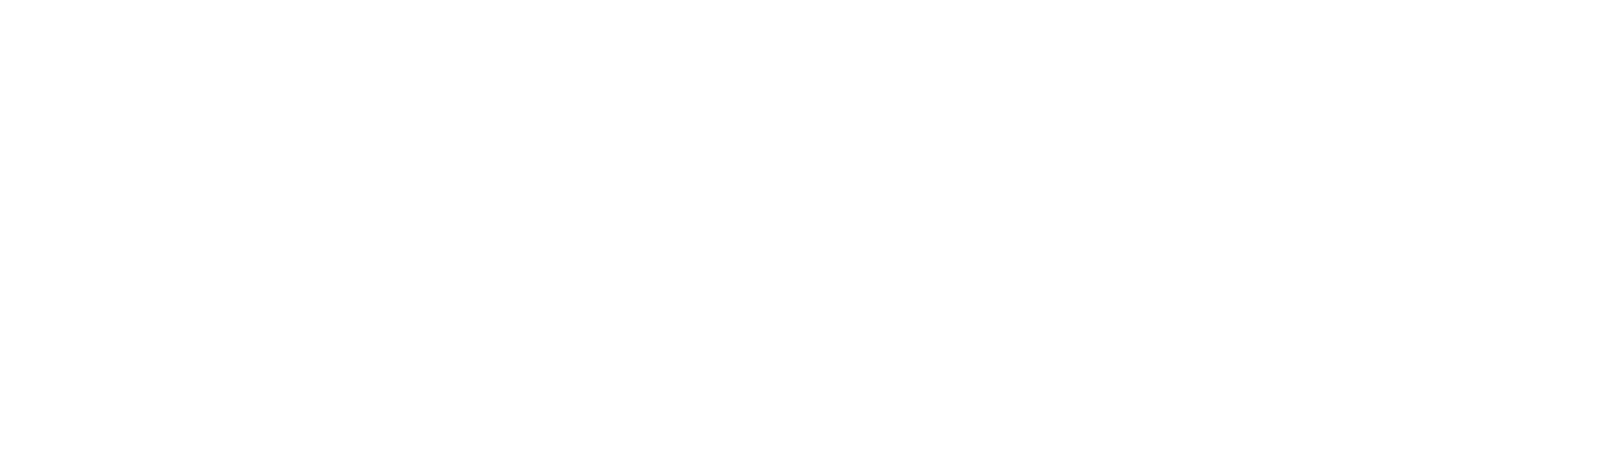 FlyVision